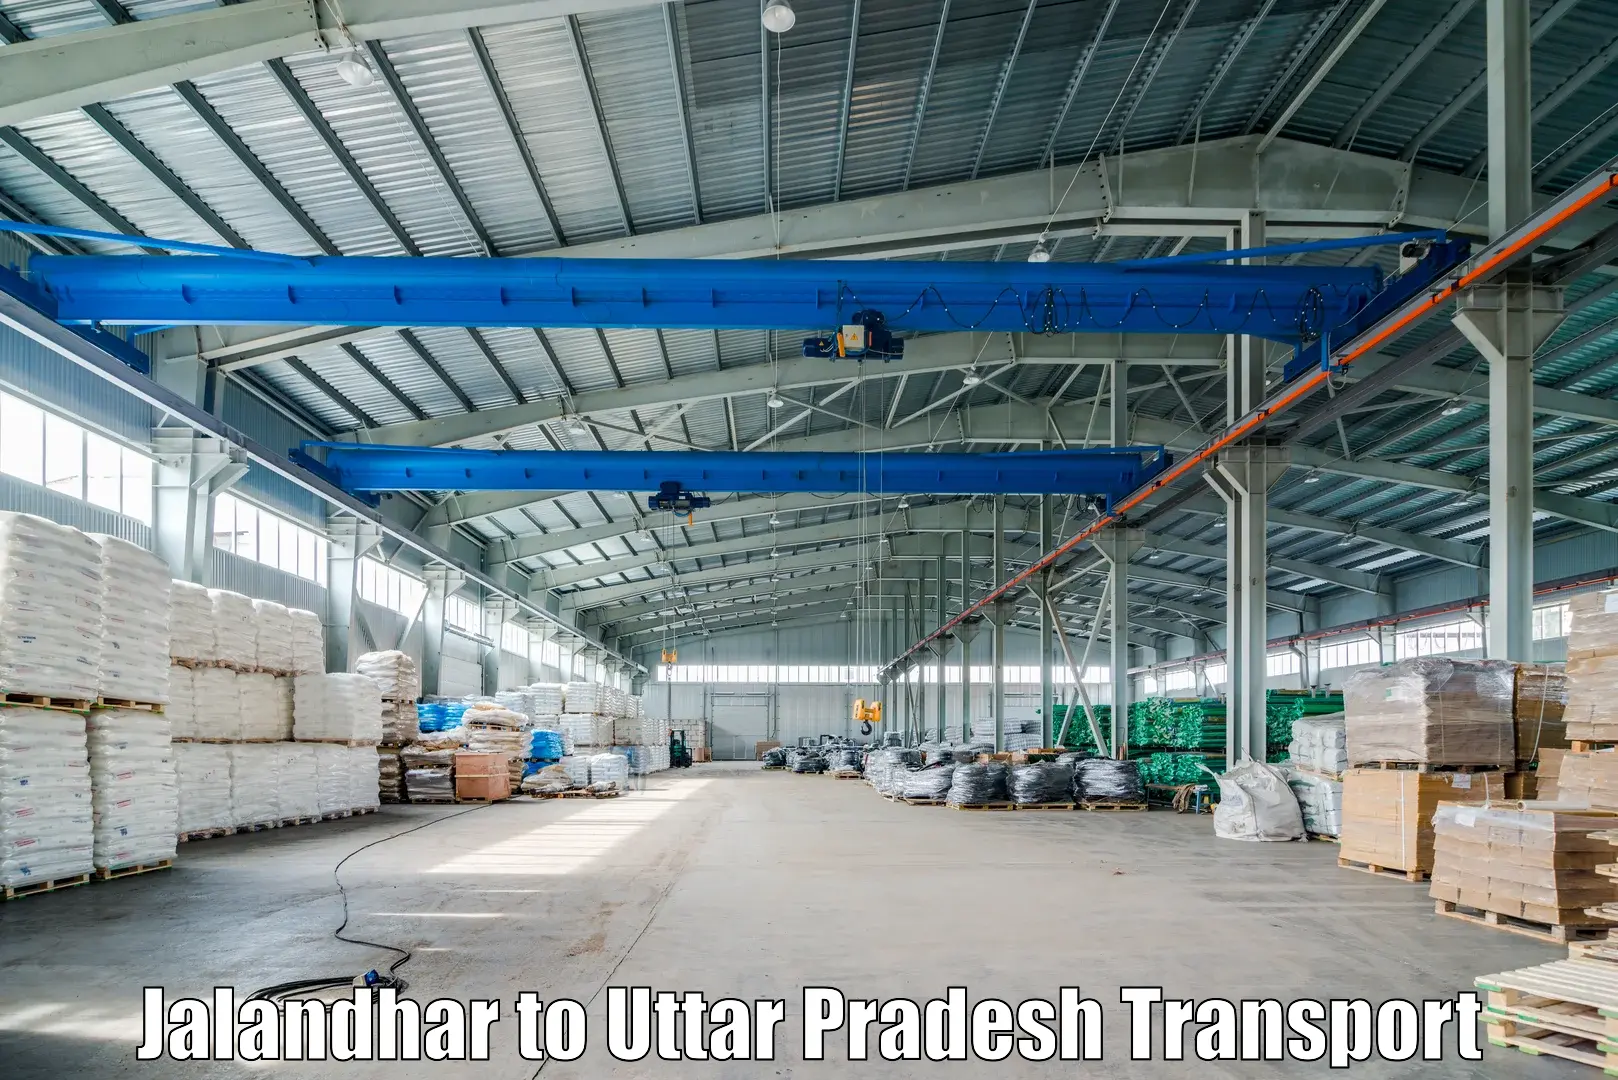 Container transport service in Jalandhar to Sonbhadra